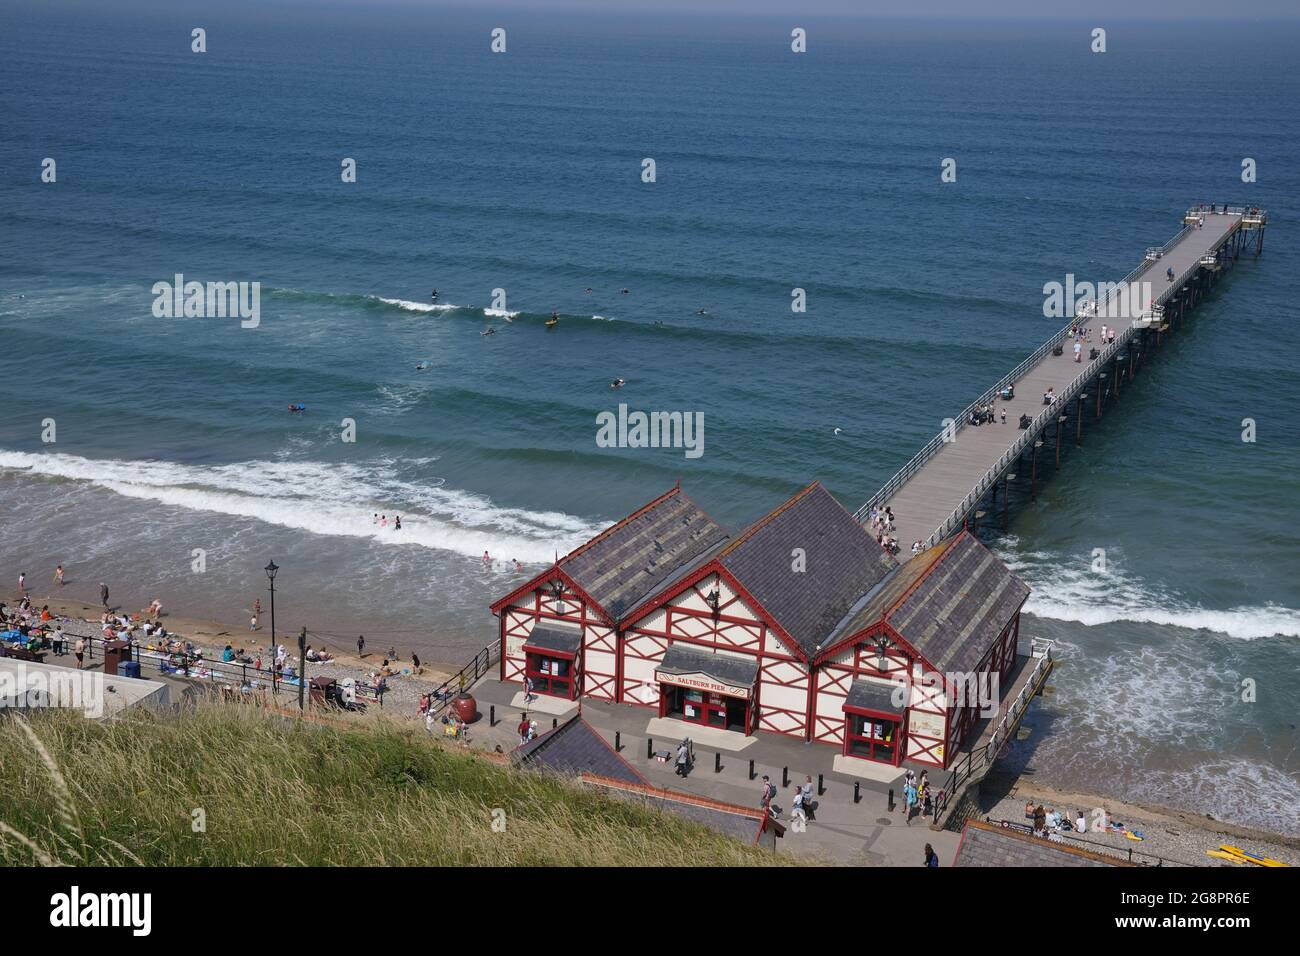 Saltburn-by-the-Sea in North Yorkshire. A heatwave which has baked the UK over the last few days is expected to end with thunderstorms across much of England and Wales this weekend, forecasters have warned. Picture date: Thursday July 22, 2021. Stock Photo